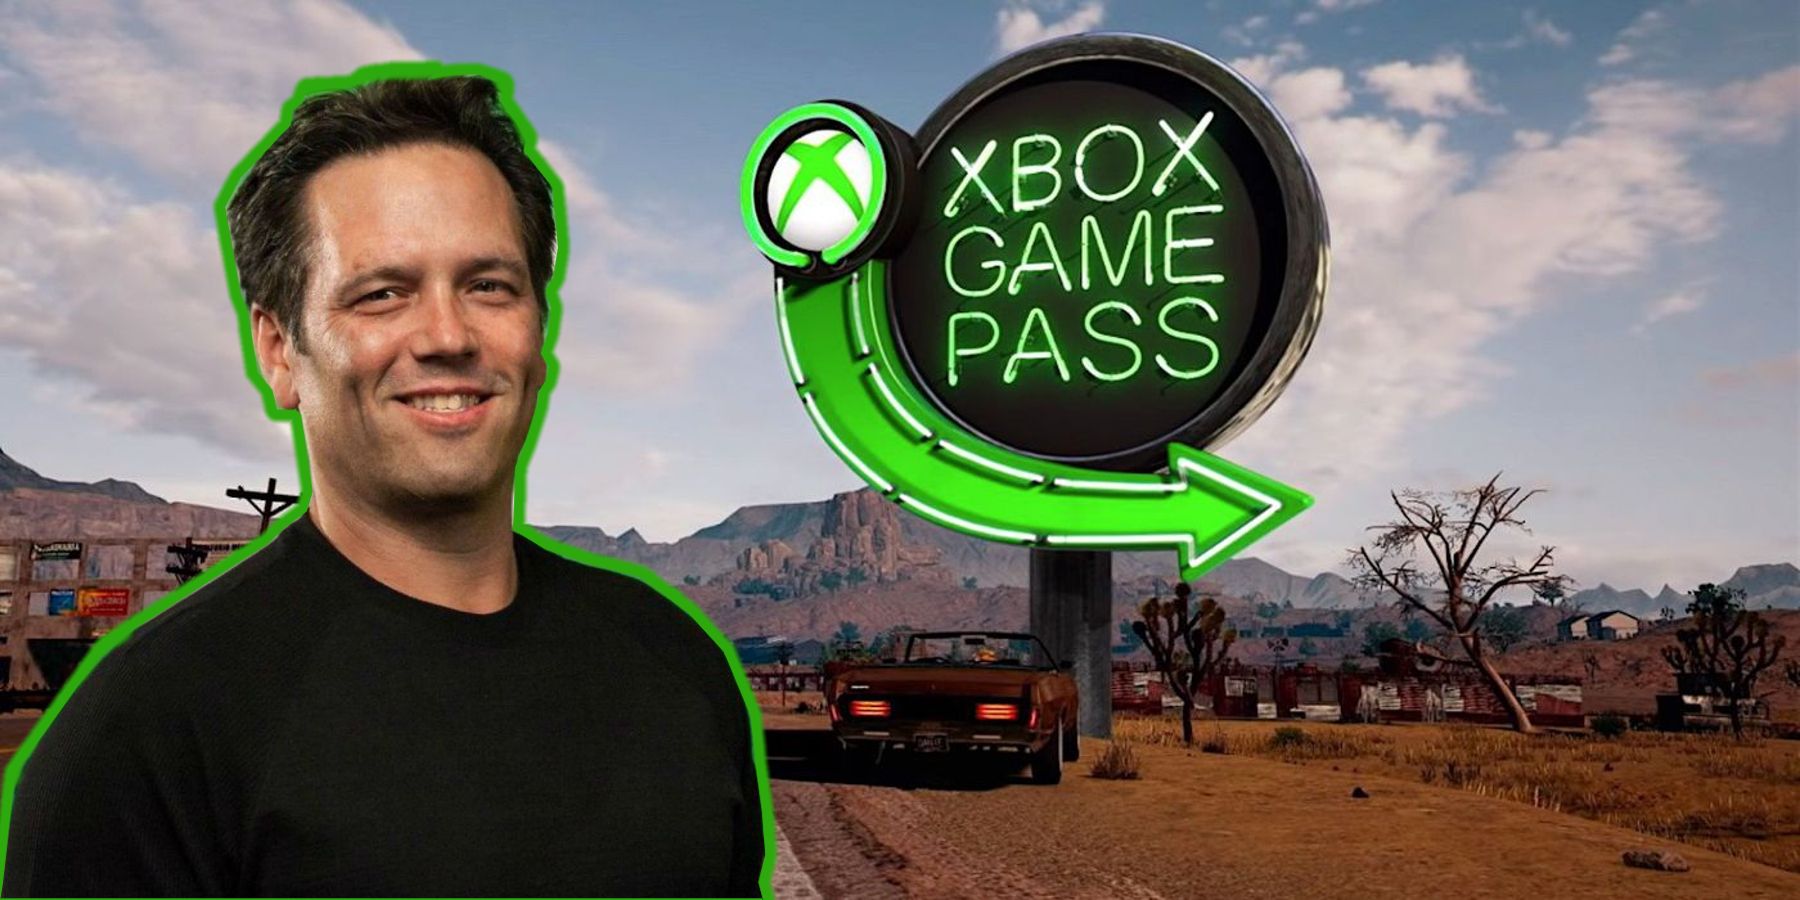 Game Pass and Xbox are profitable, Phil Spencer reiterates